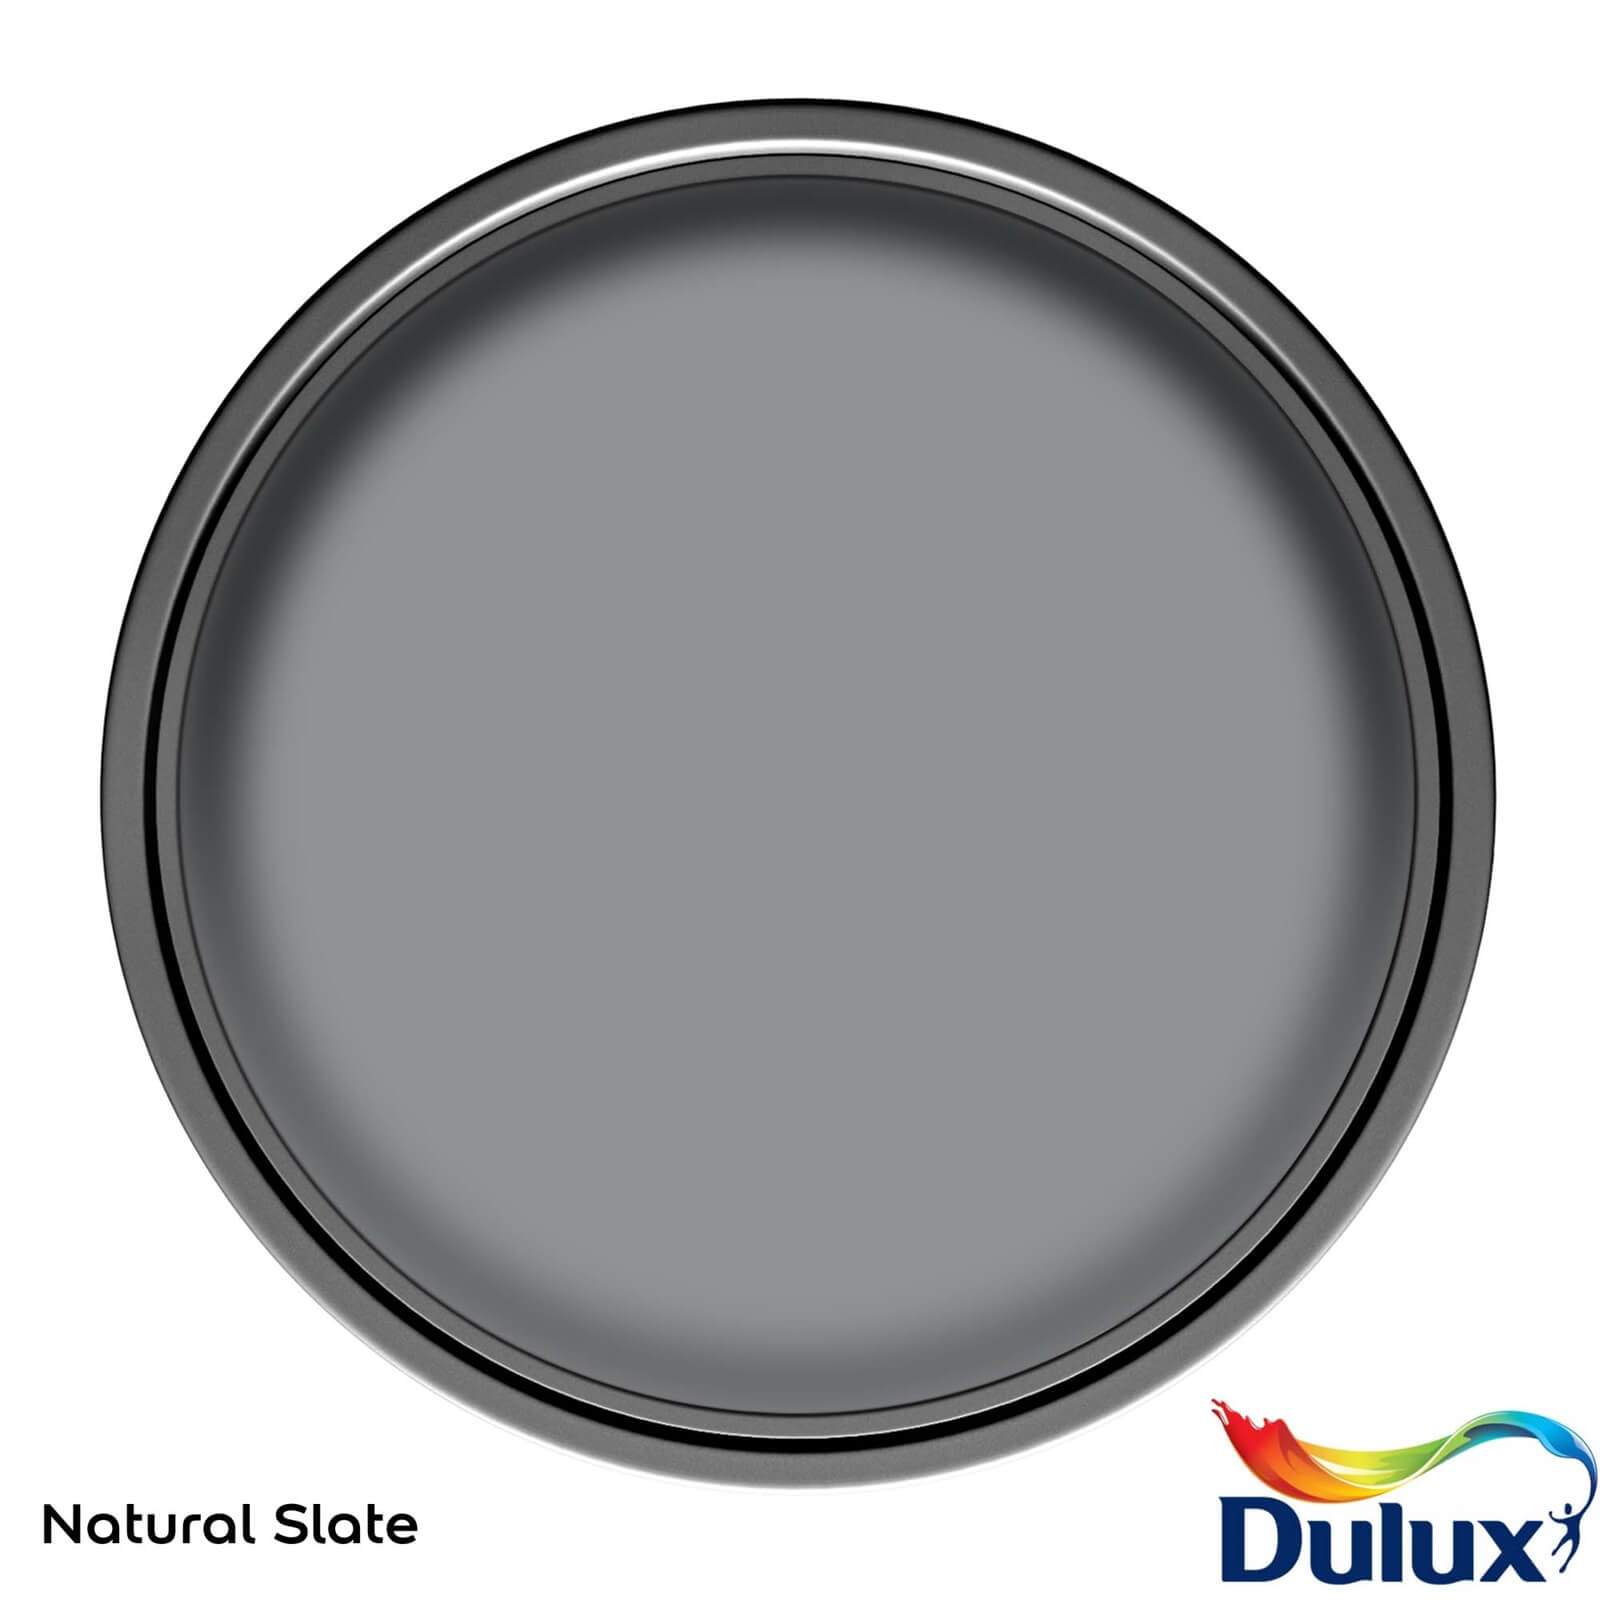 Dulux Quick Dry Gloss Paint Natural Slate - 750ml